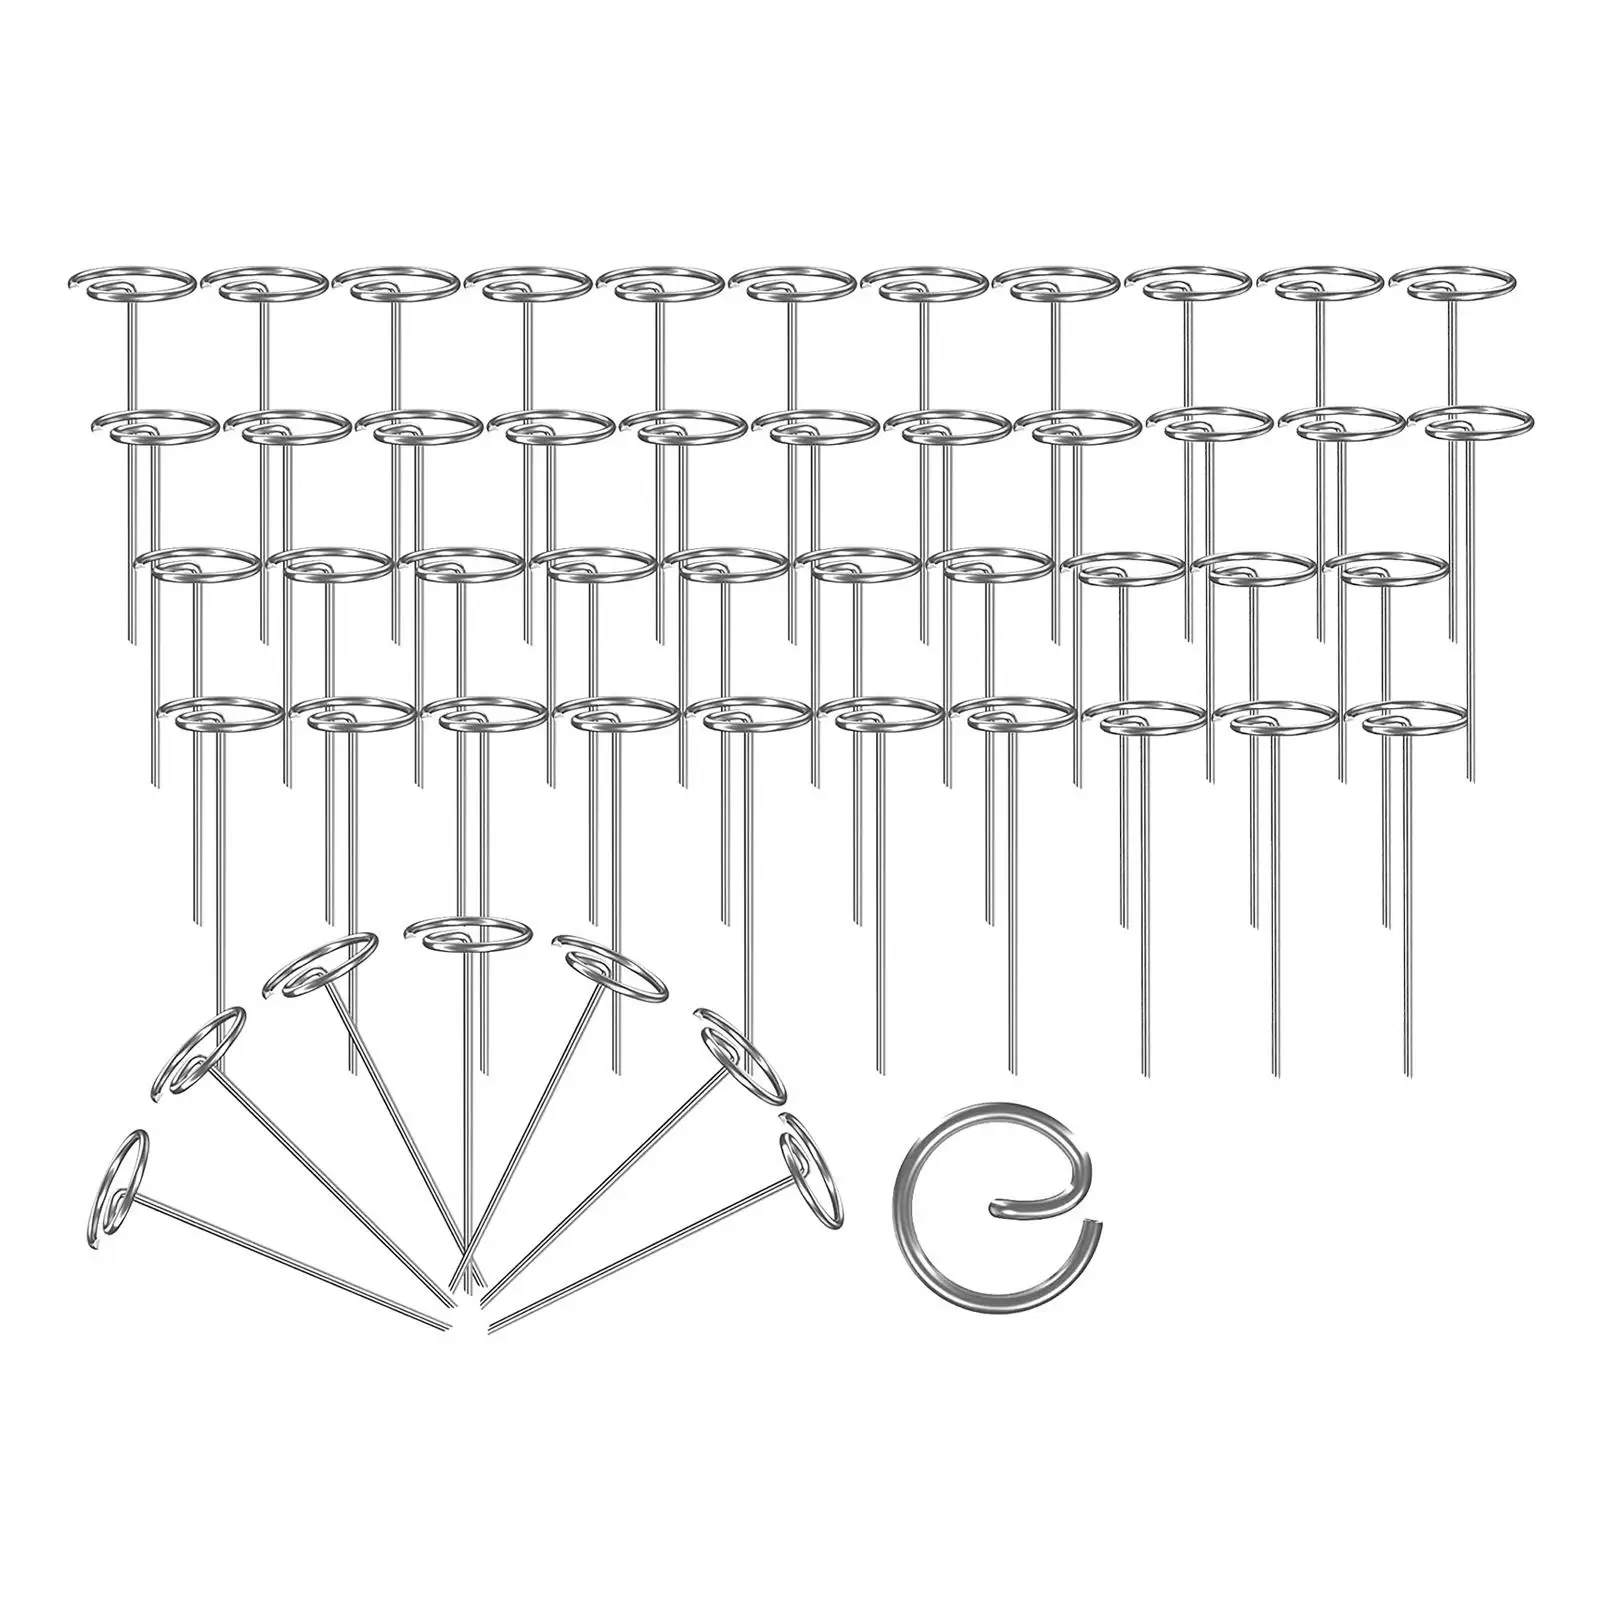 50x Galvanized Steel Circle Top Pins Tent Pegs Landscape Staples Landscape Pins sod Staples for Ground Fence Lawn Gardening